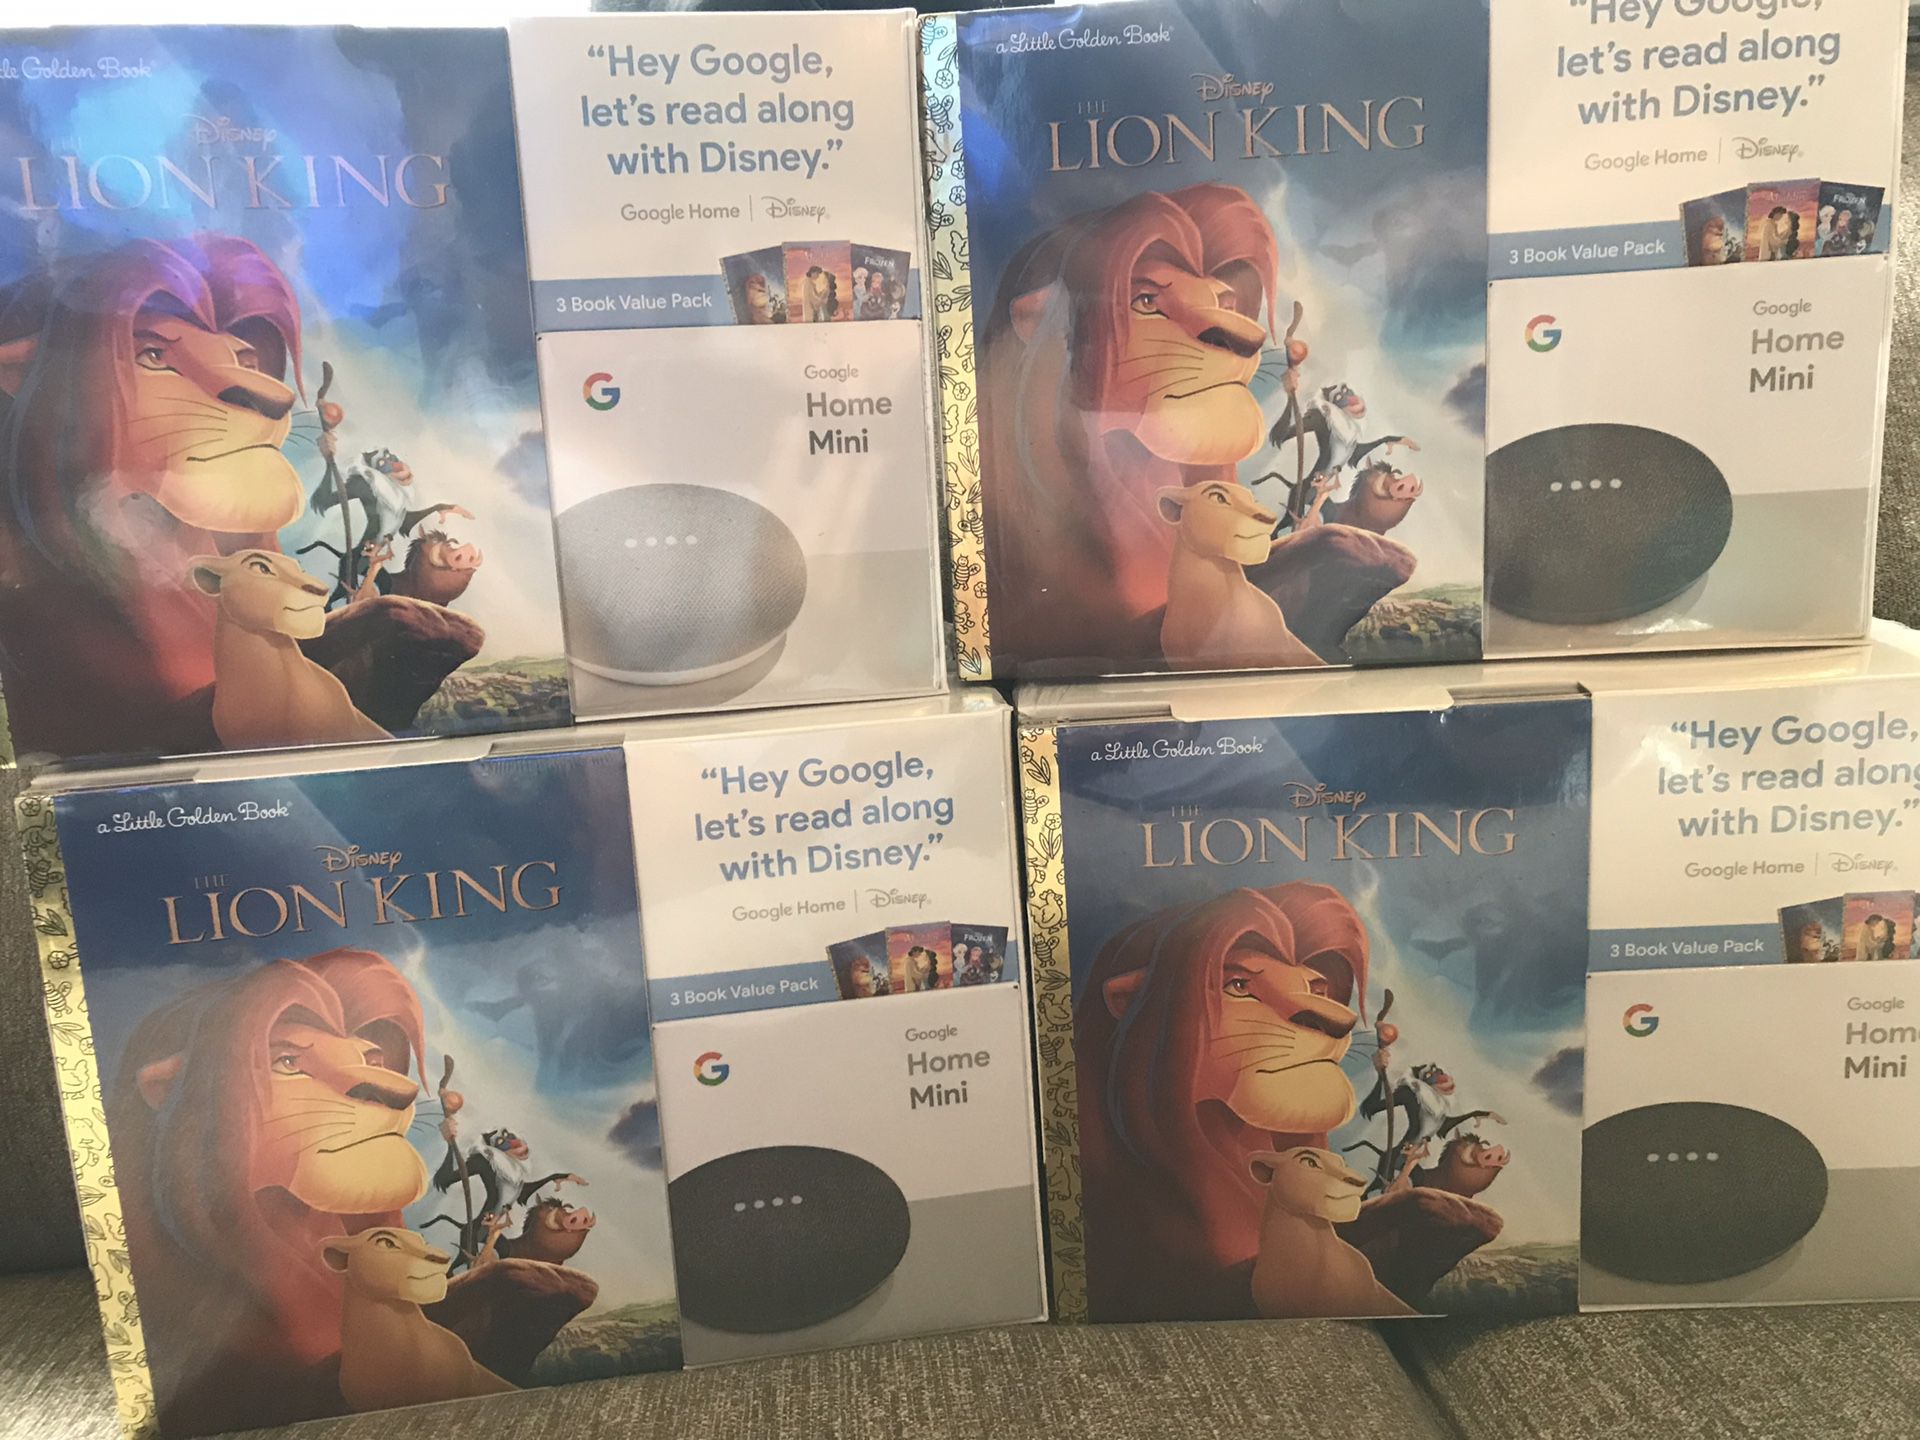 Google home mini with 3 Disney books included